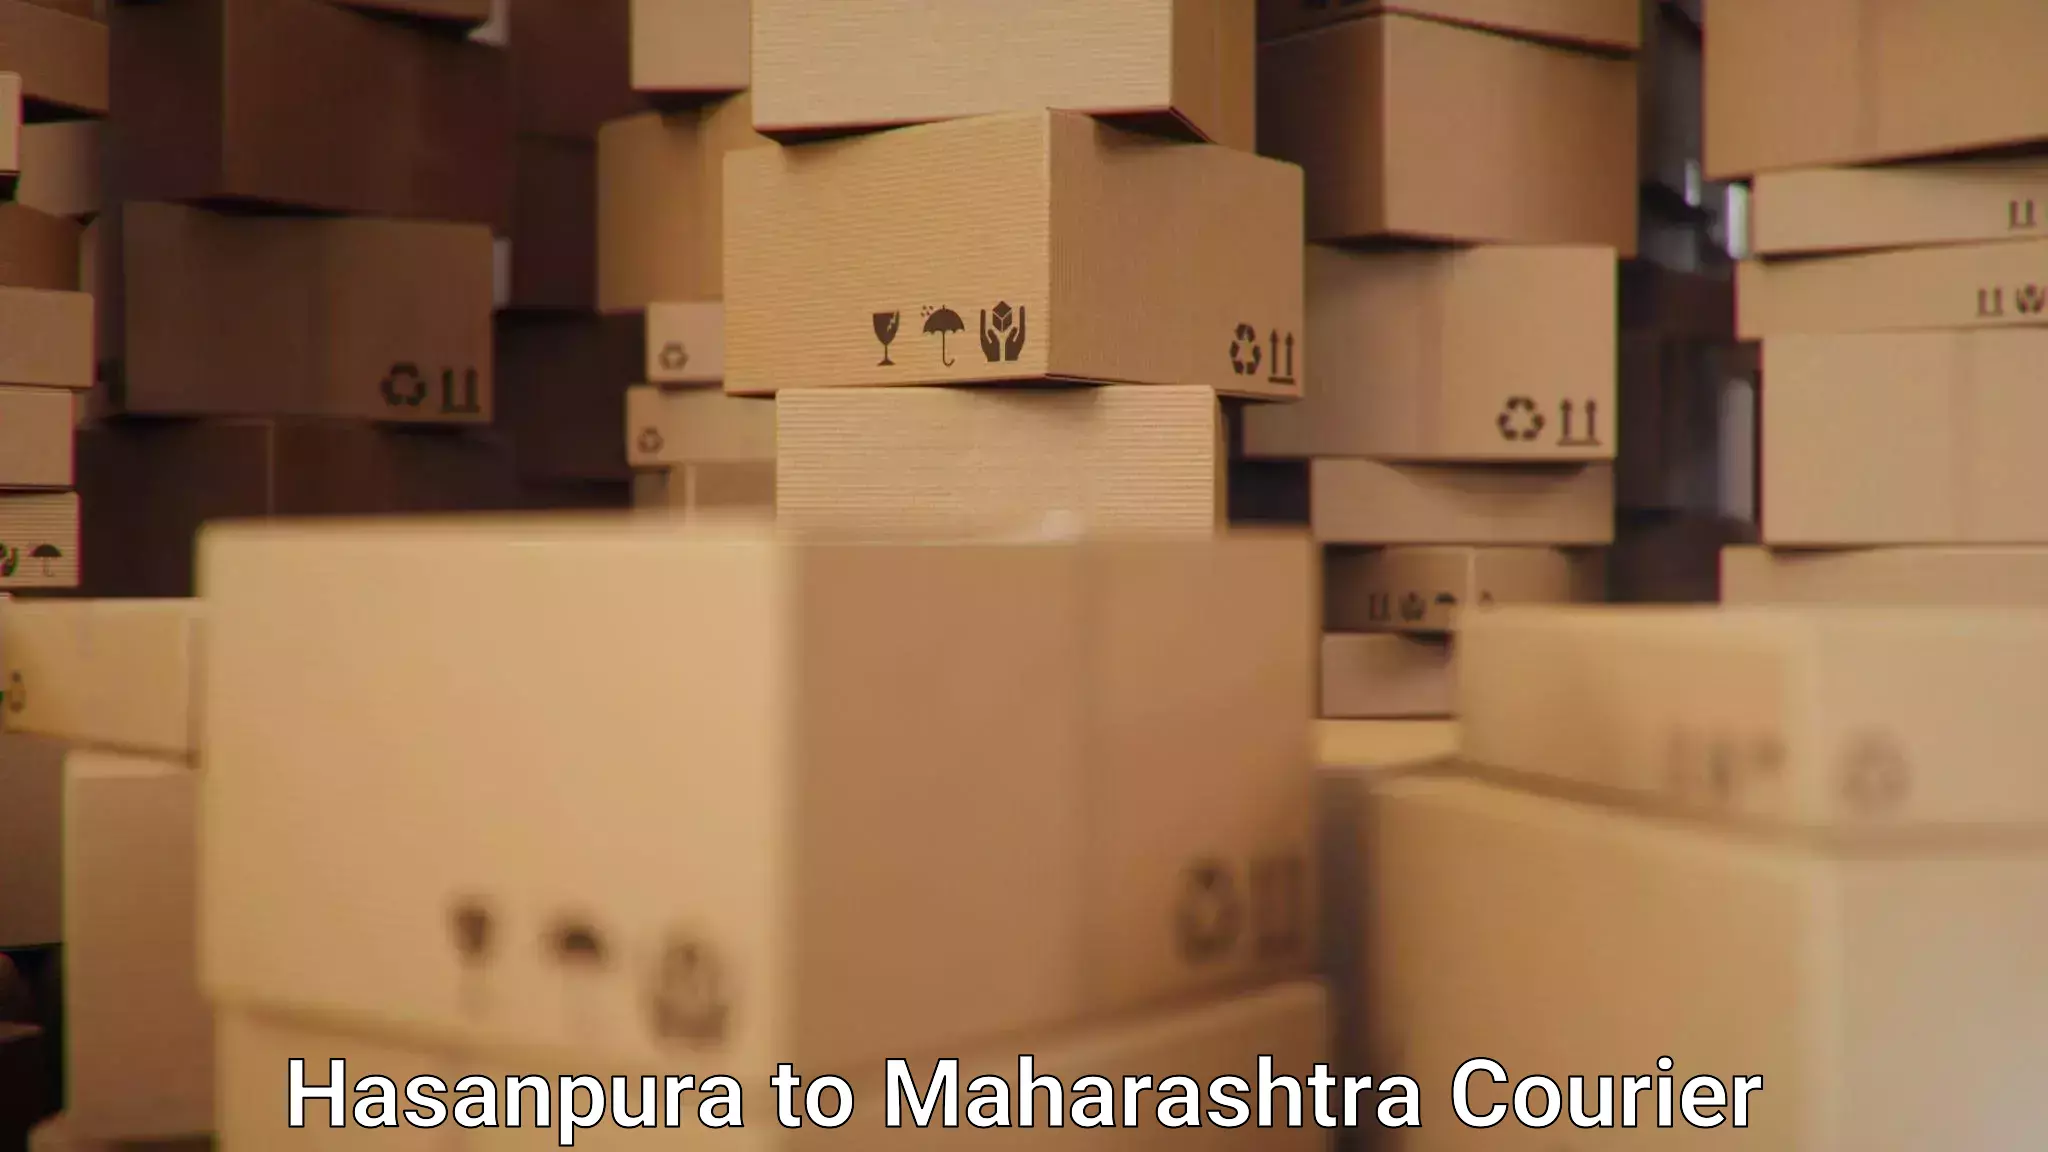 Efficient freight service in Hasanpura to Maharashtra